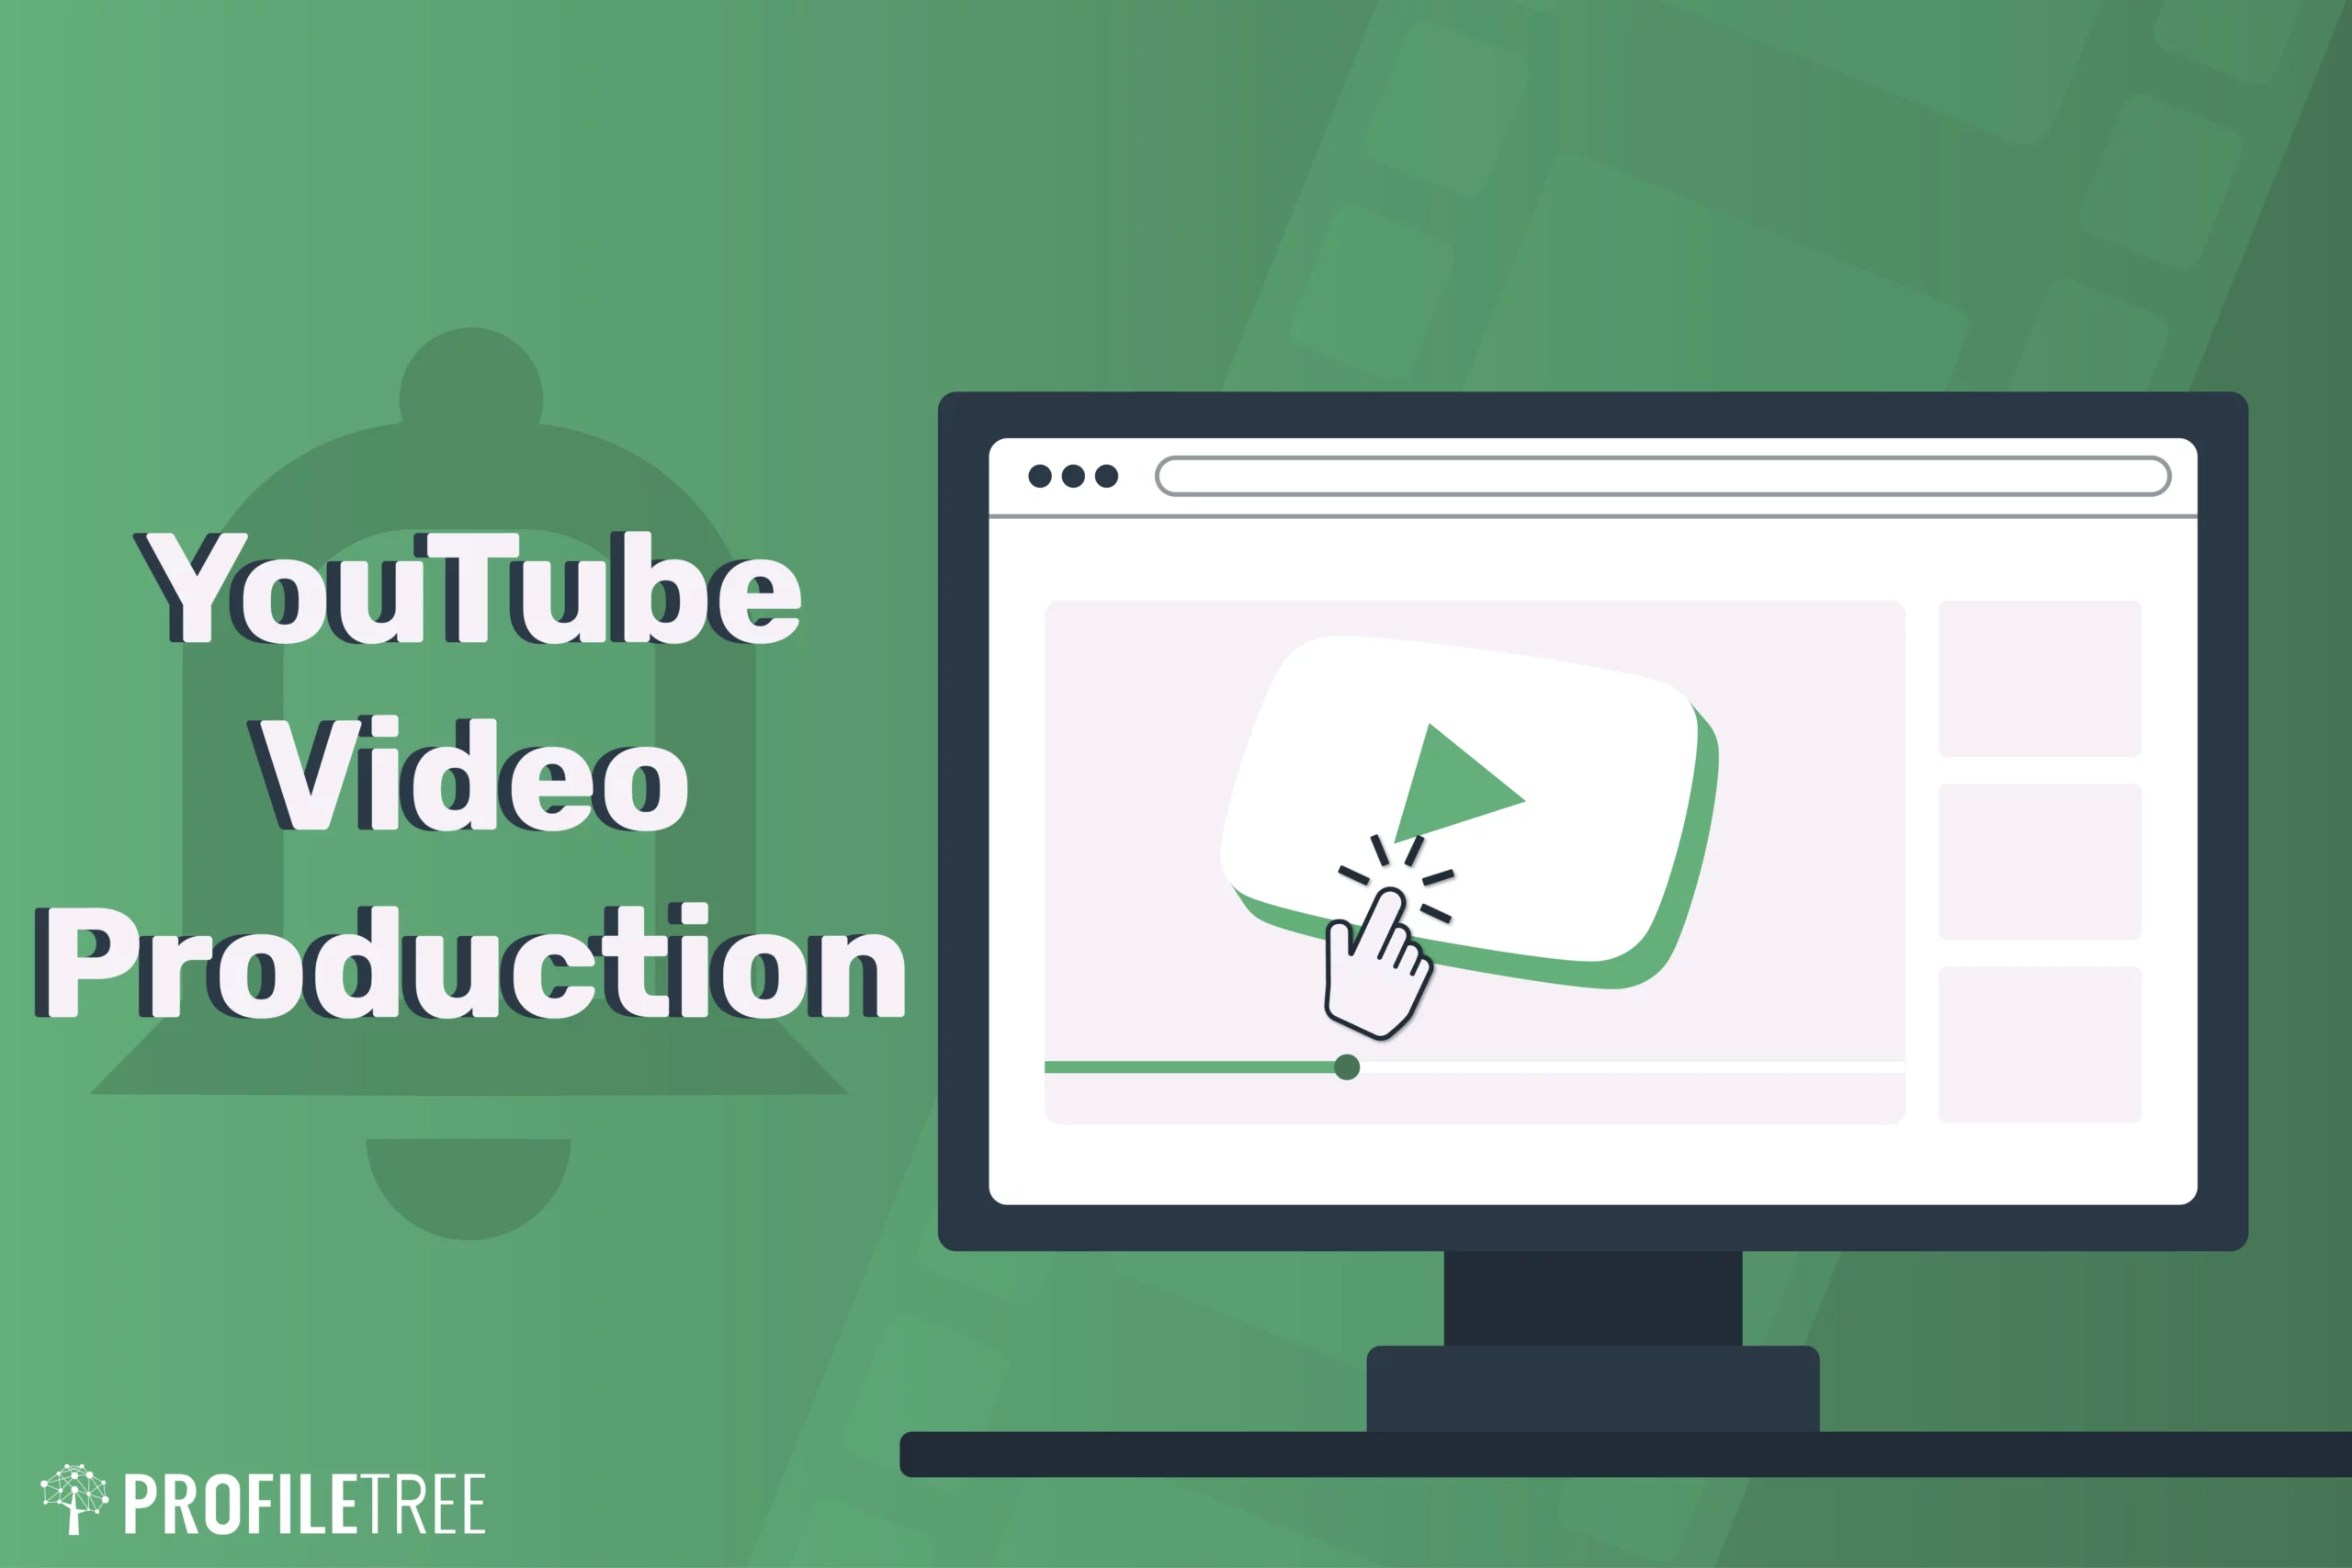 YouTube Video Production